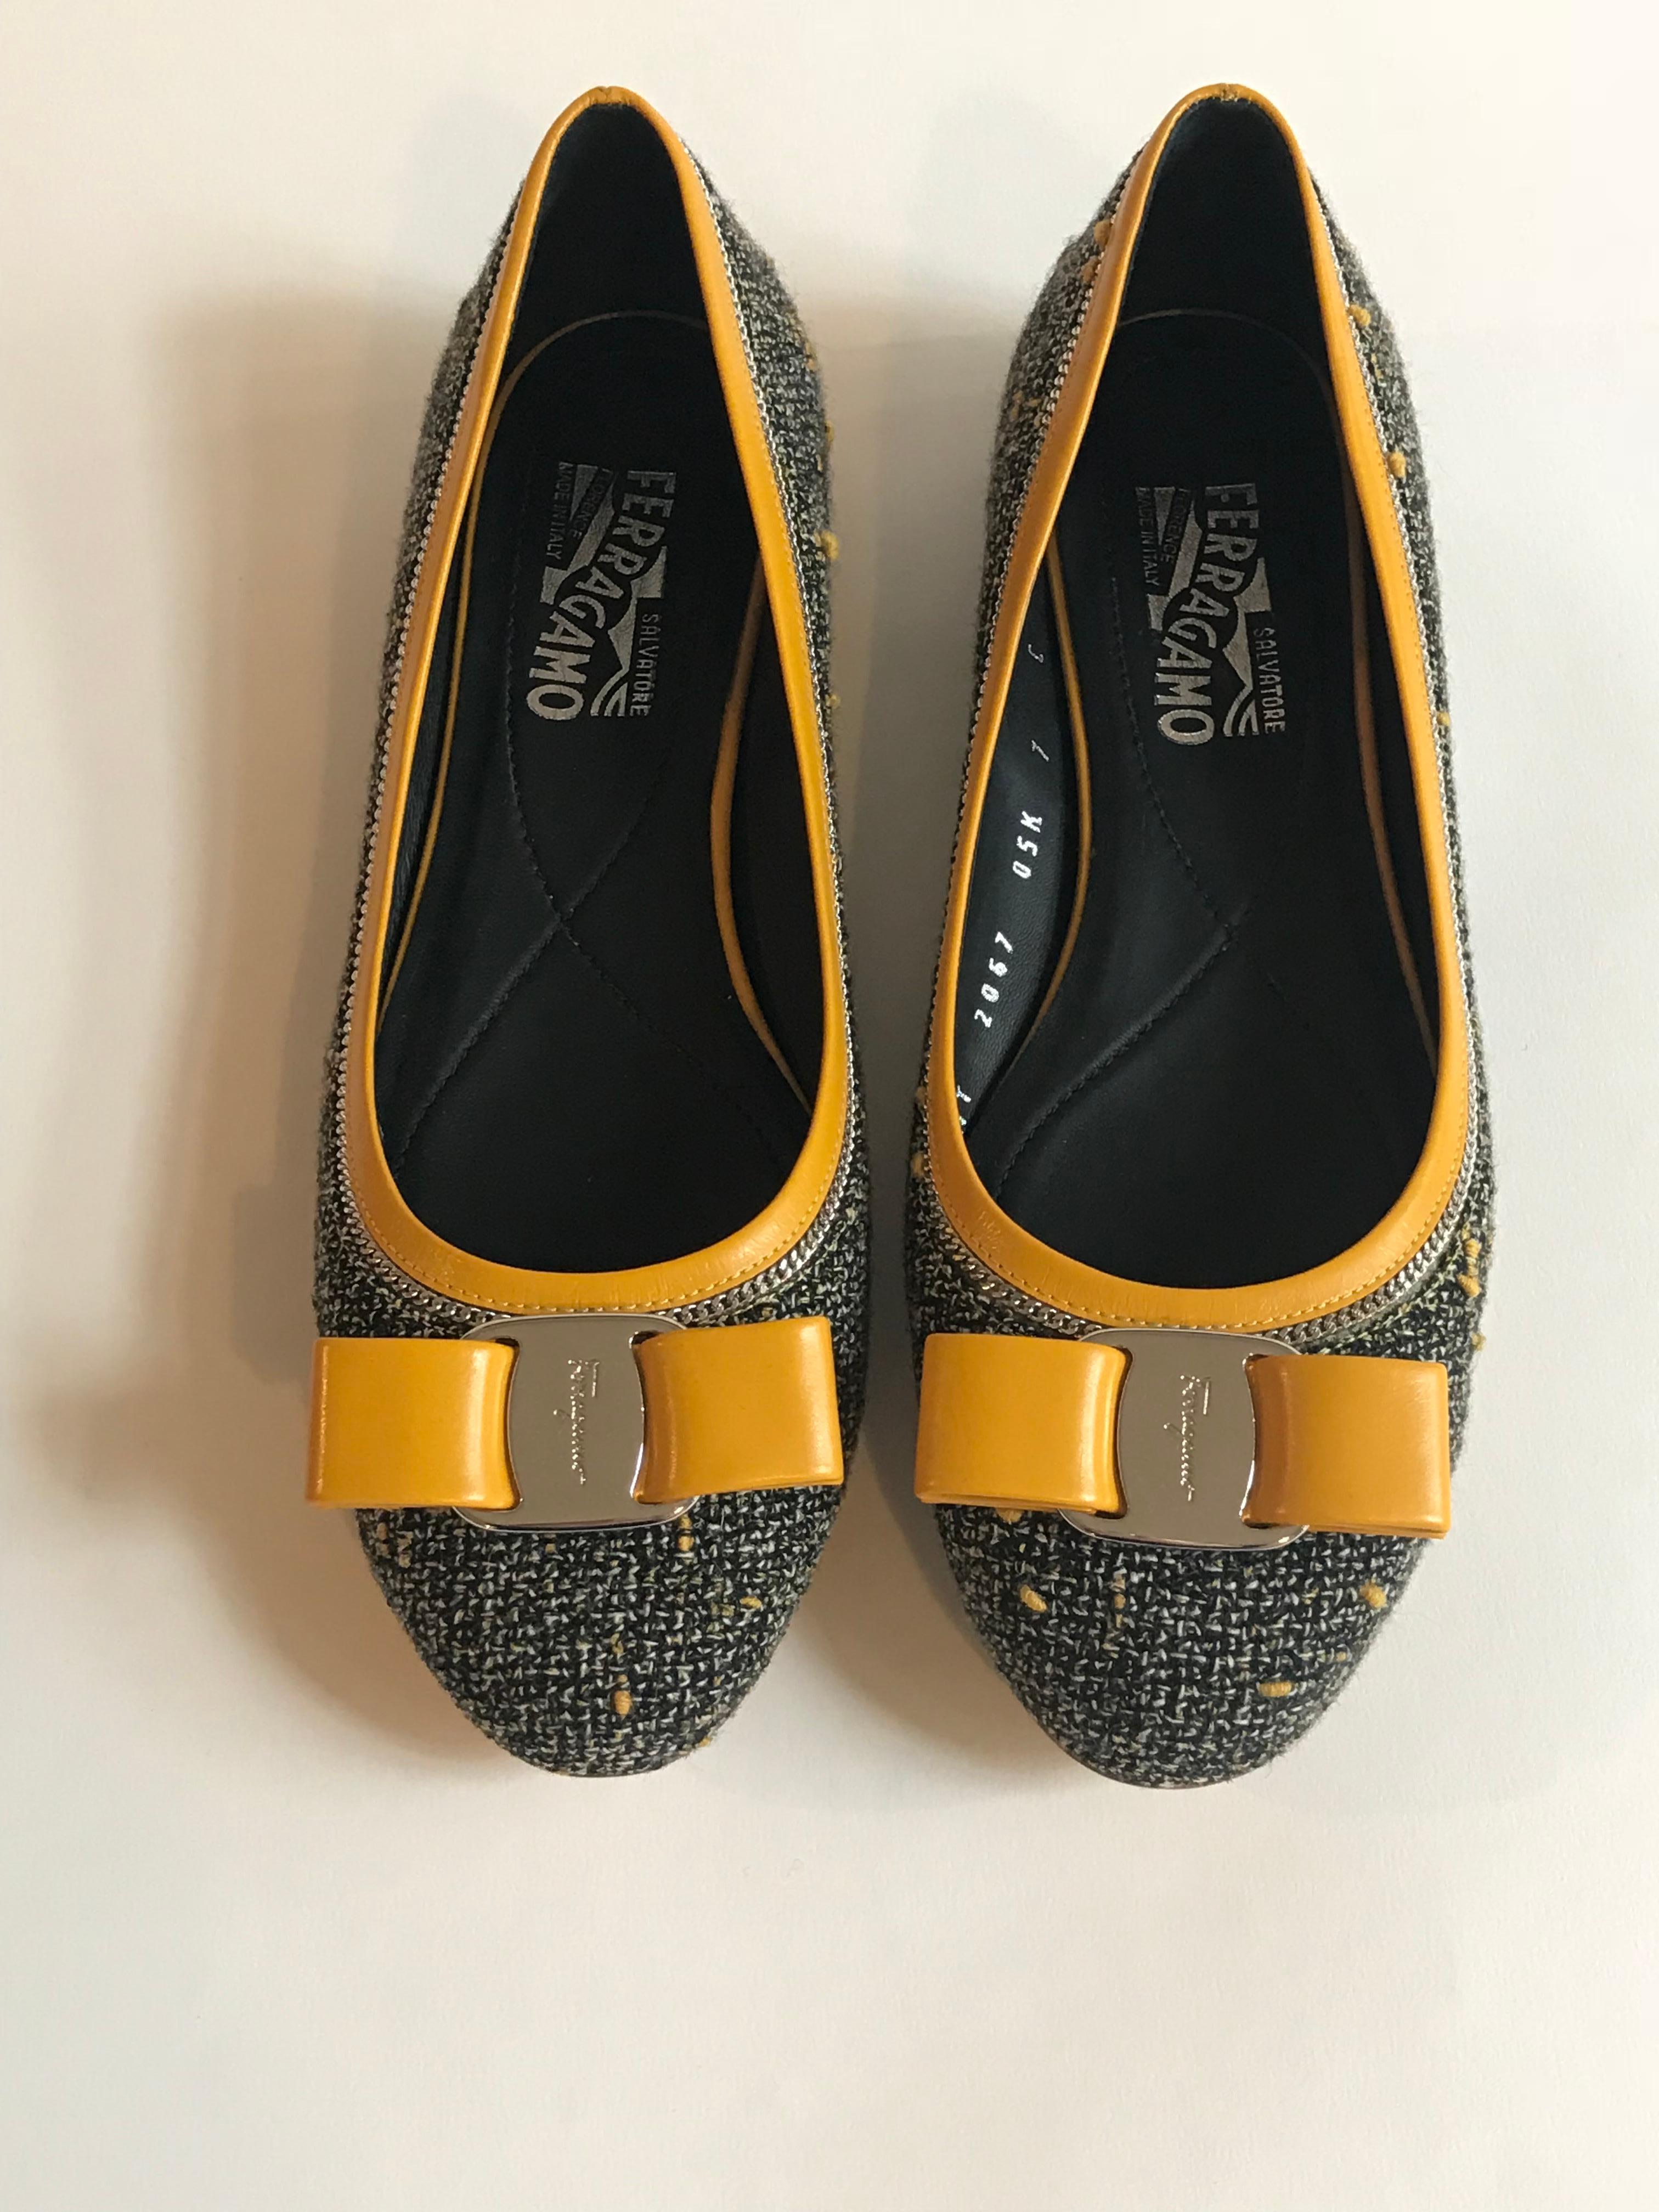 Salvatore Ferragamo black and white tweed shoes with pollen yellow accents. Round toe ballerina flat style. Silver chain and yellow leather detail at upper trim. Yellow leather bow at toe with signature Ferragamo script logo at metal center. 

Made